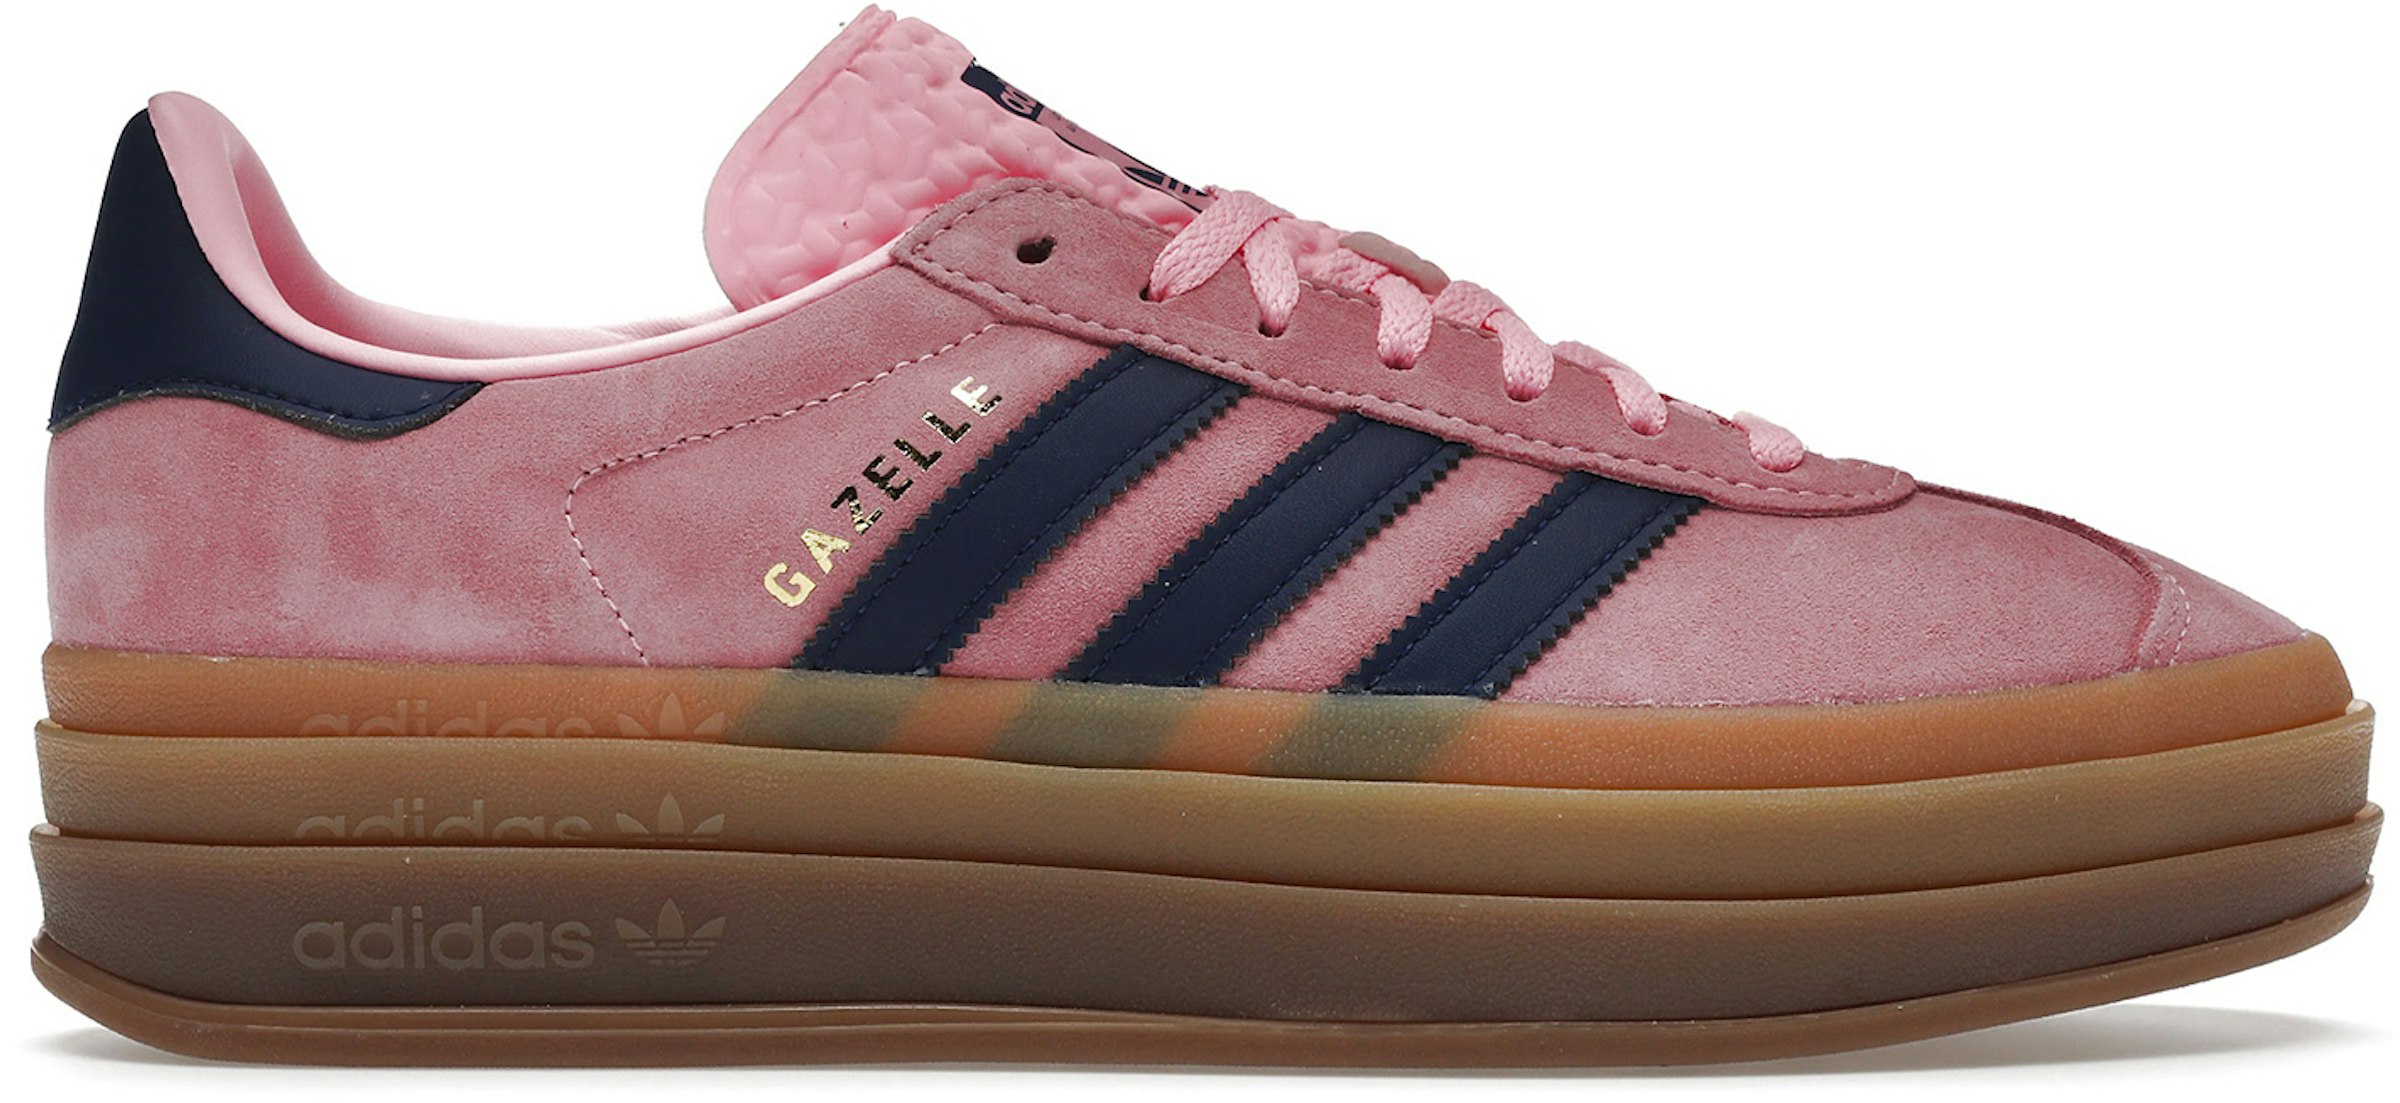 Buy adidas Gazelle Shoes & Sneakers StockX